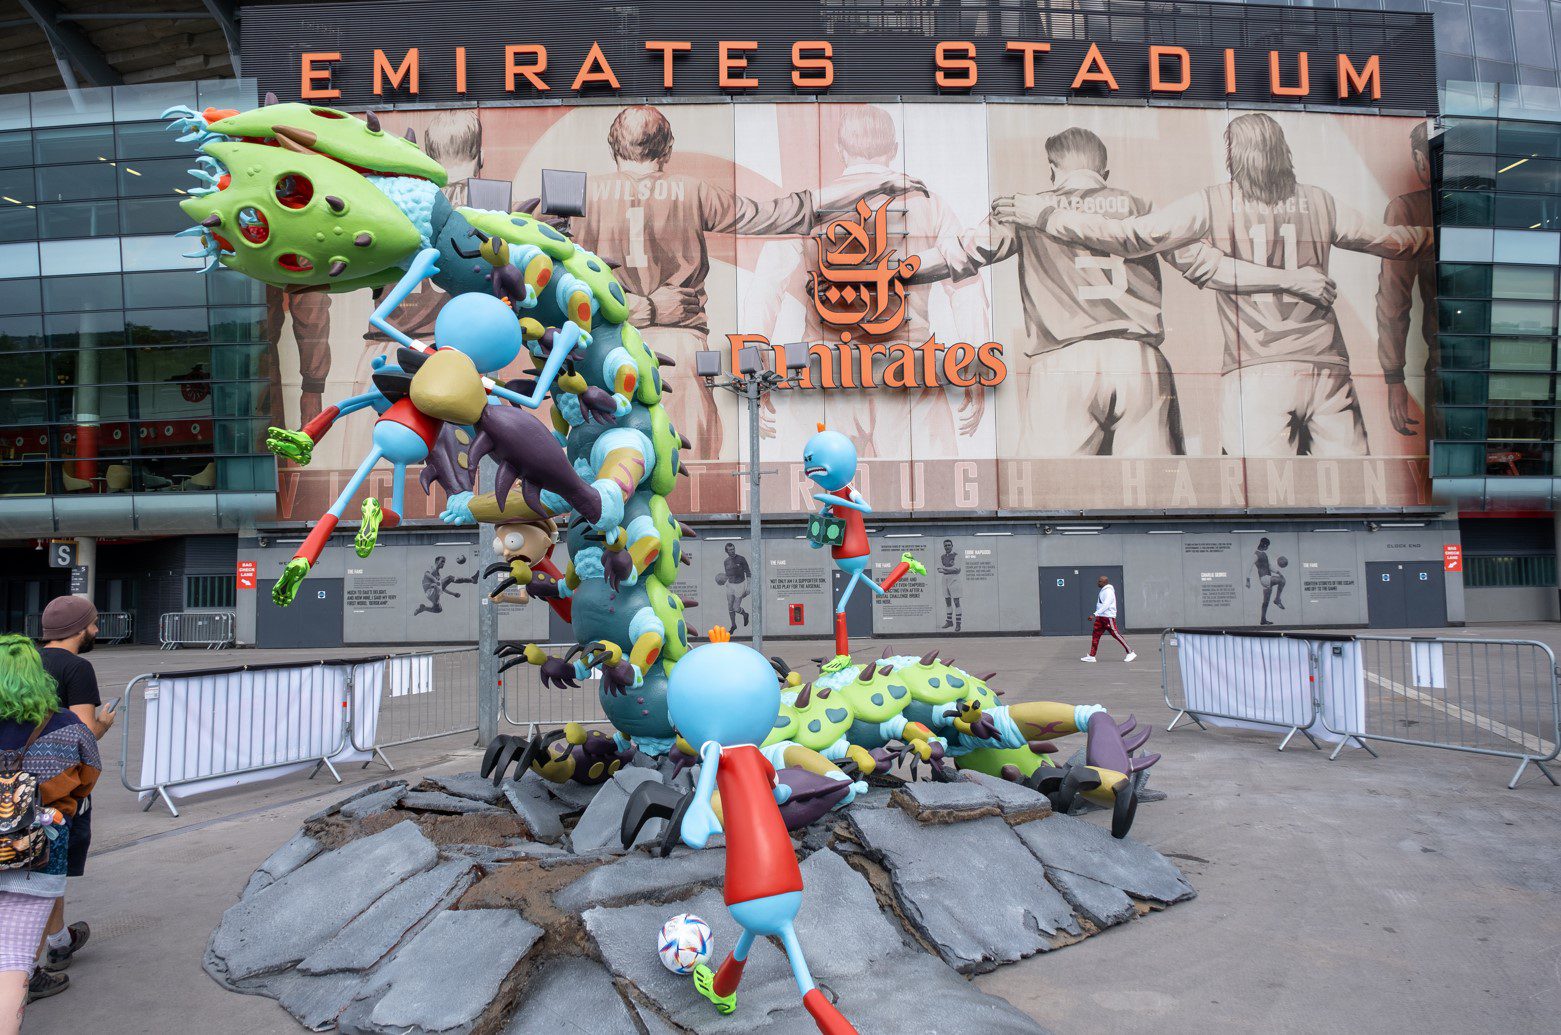 A blue and green monster emerging from the ground in front of emirates stadium